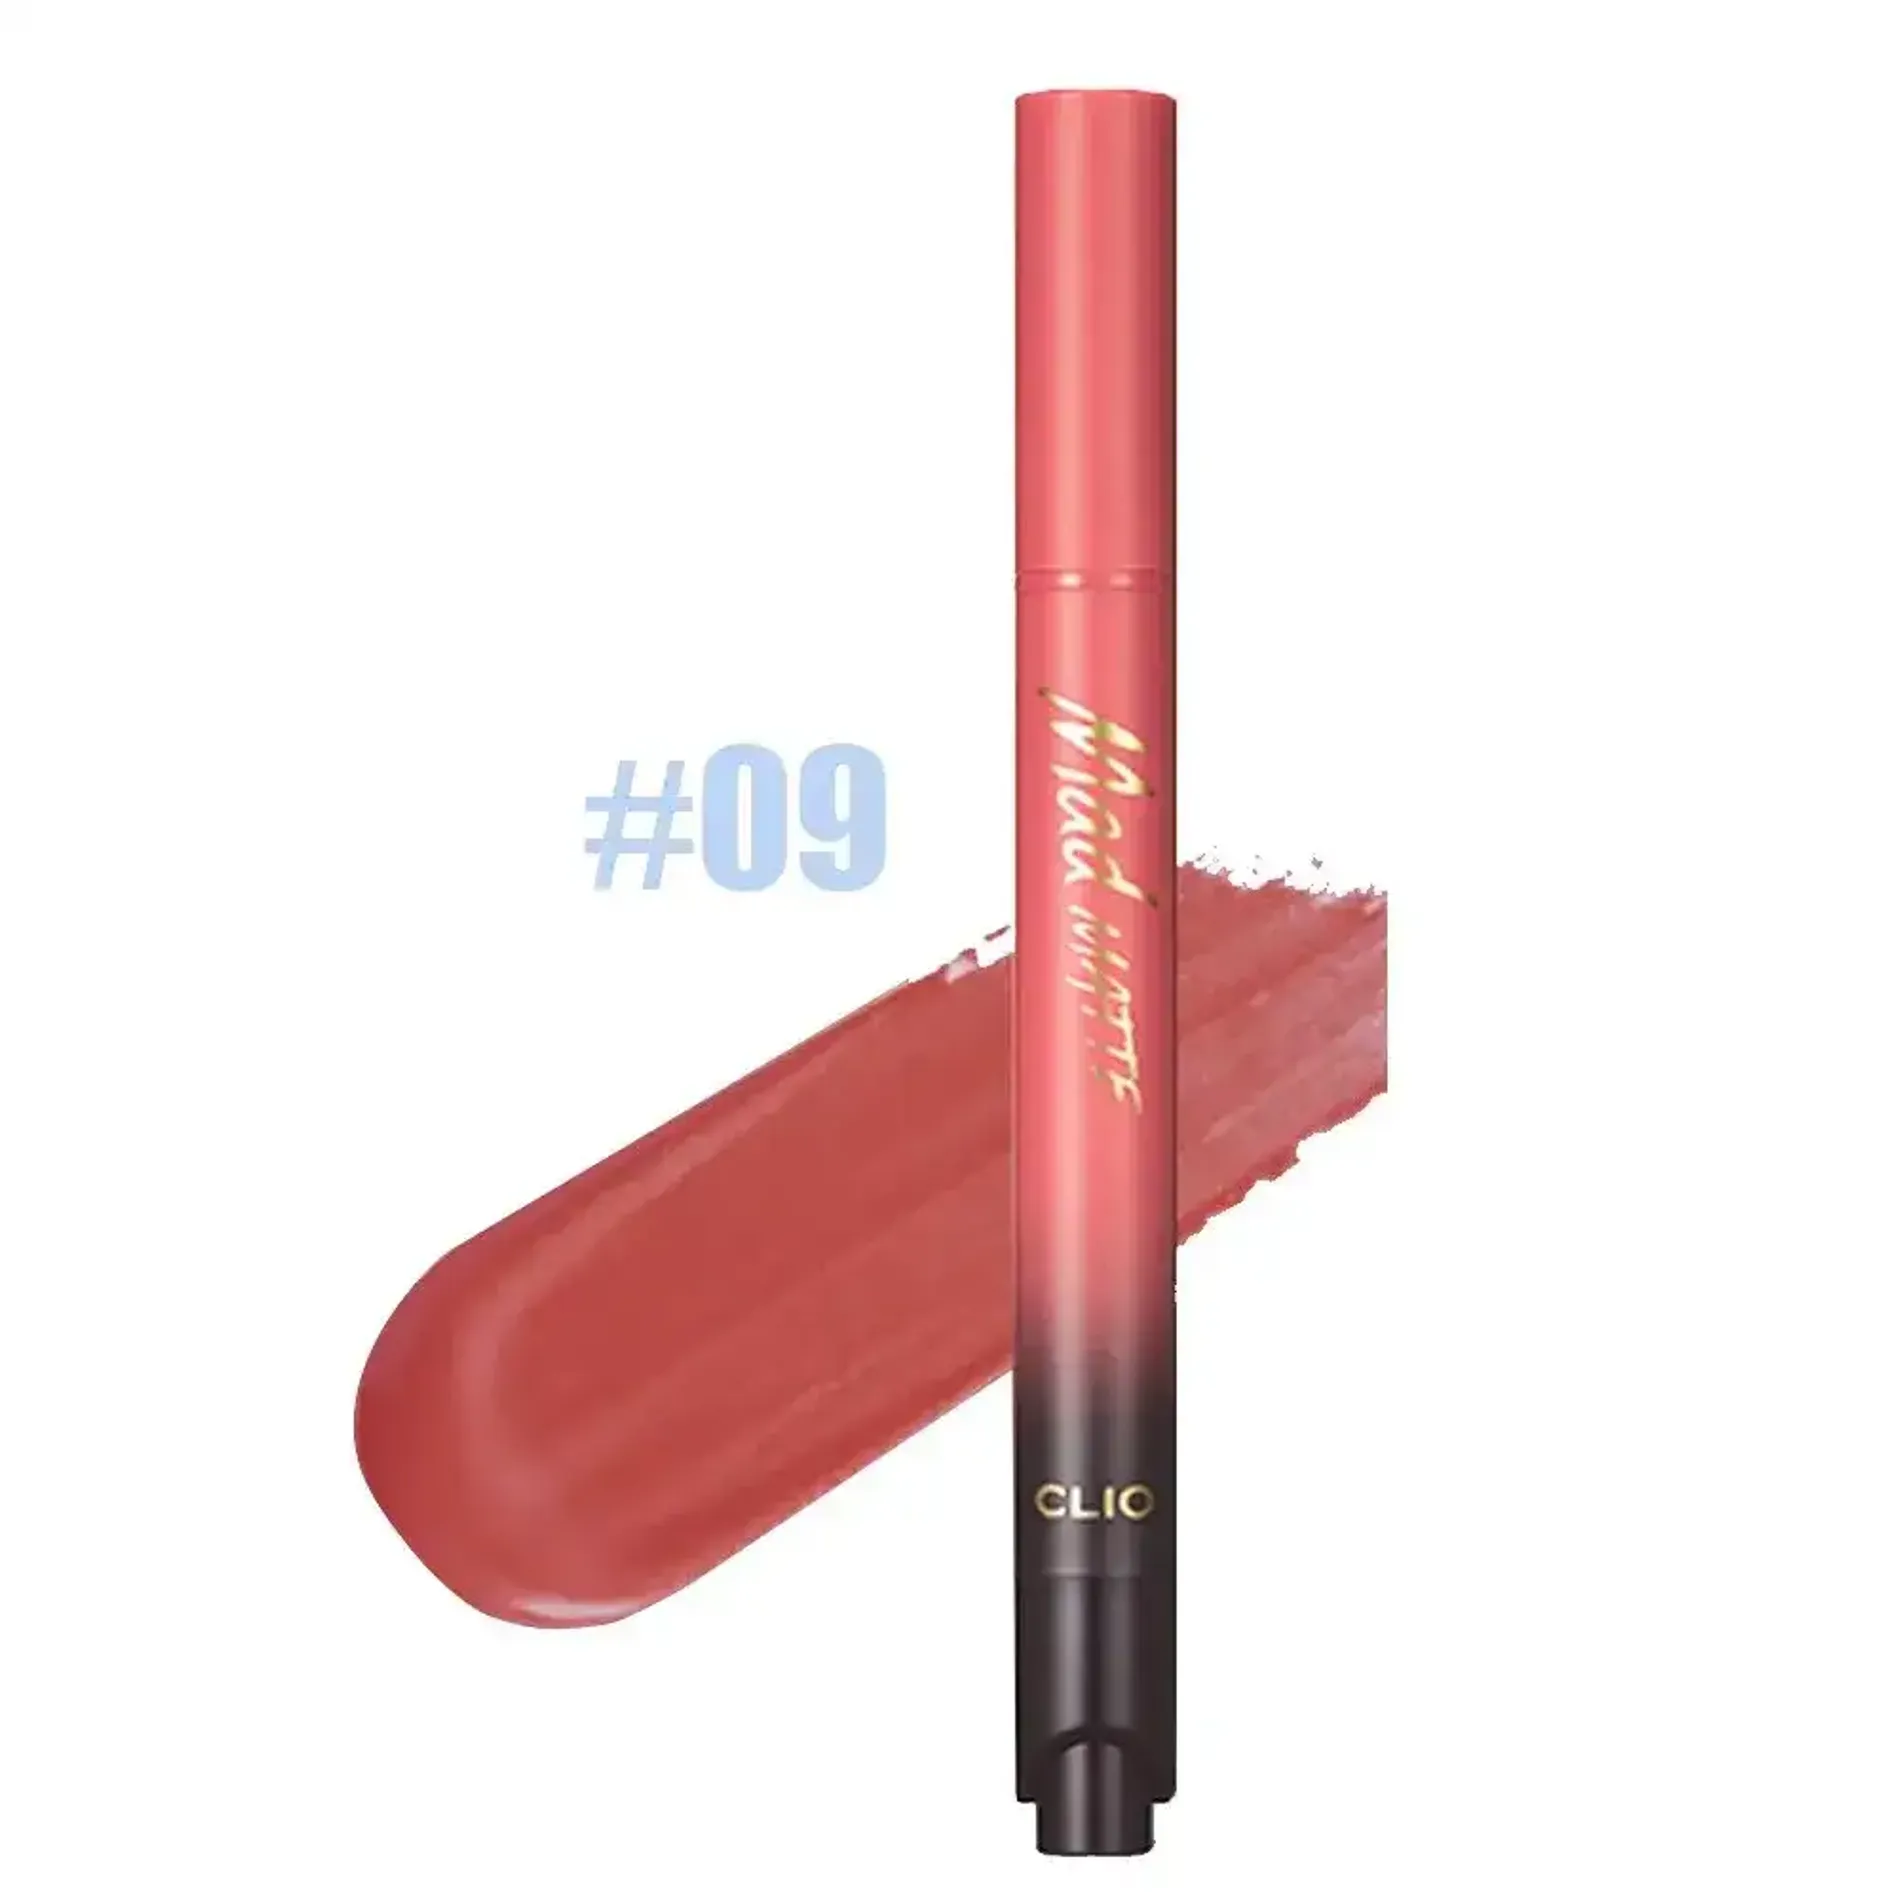 gift-son-nuoc-dang-bam-clio-mad-matte-stain-tint-09-juneberry-1